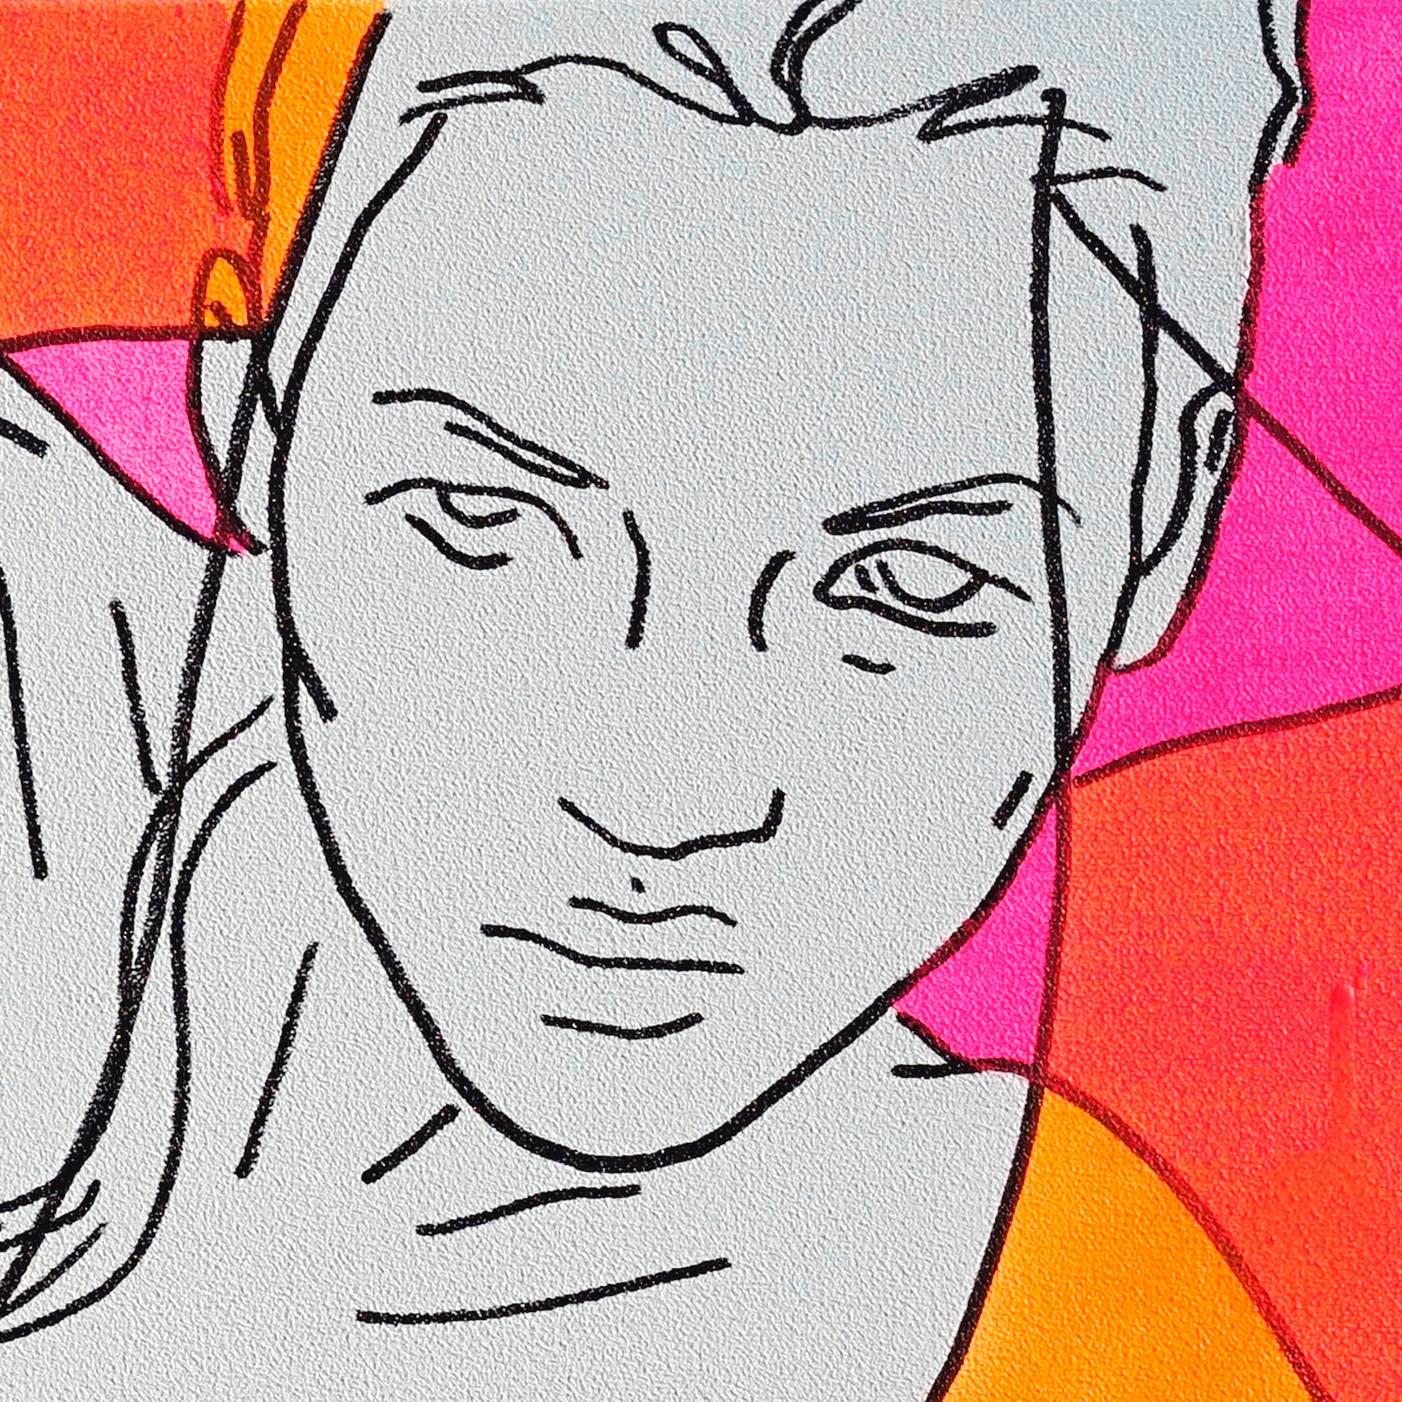 Hot Pink and Neon Orange - Pop Art Painting by Hilary Bond